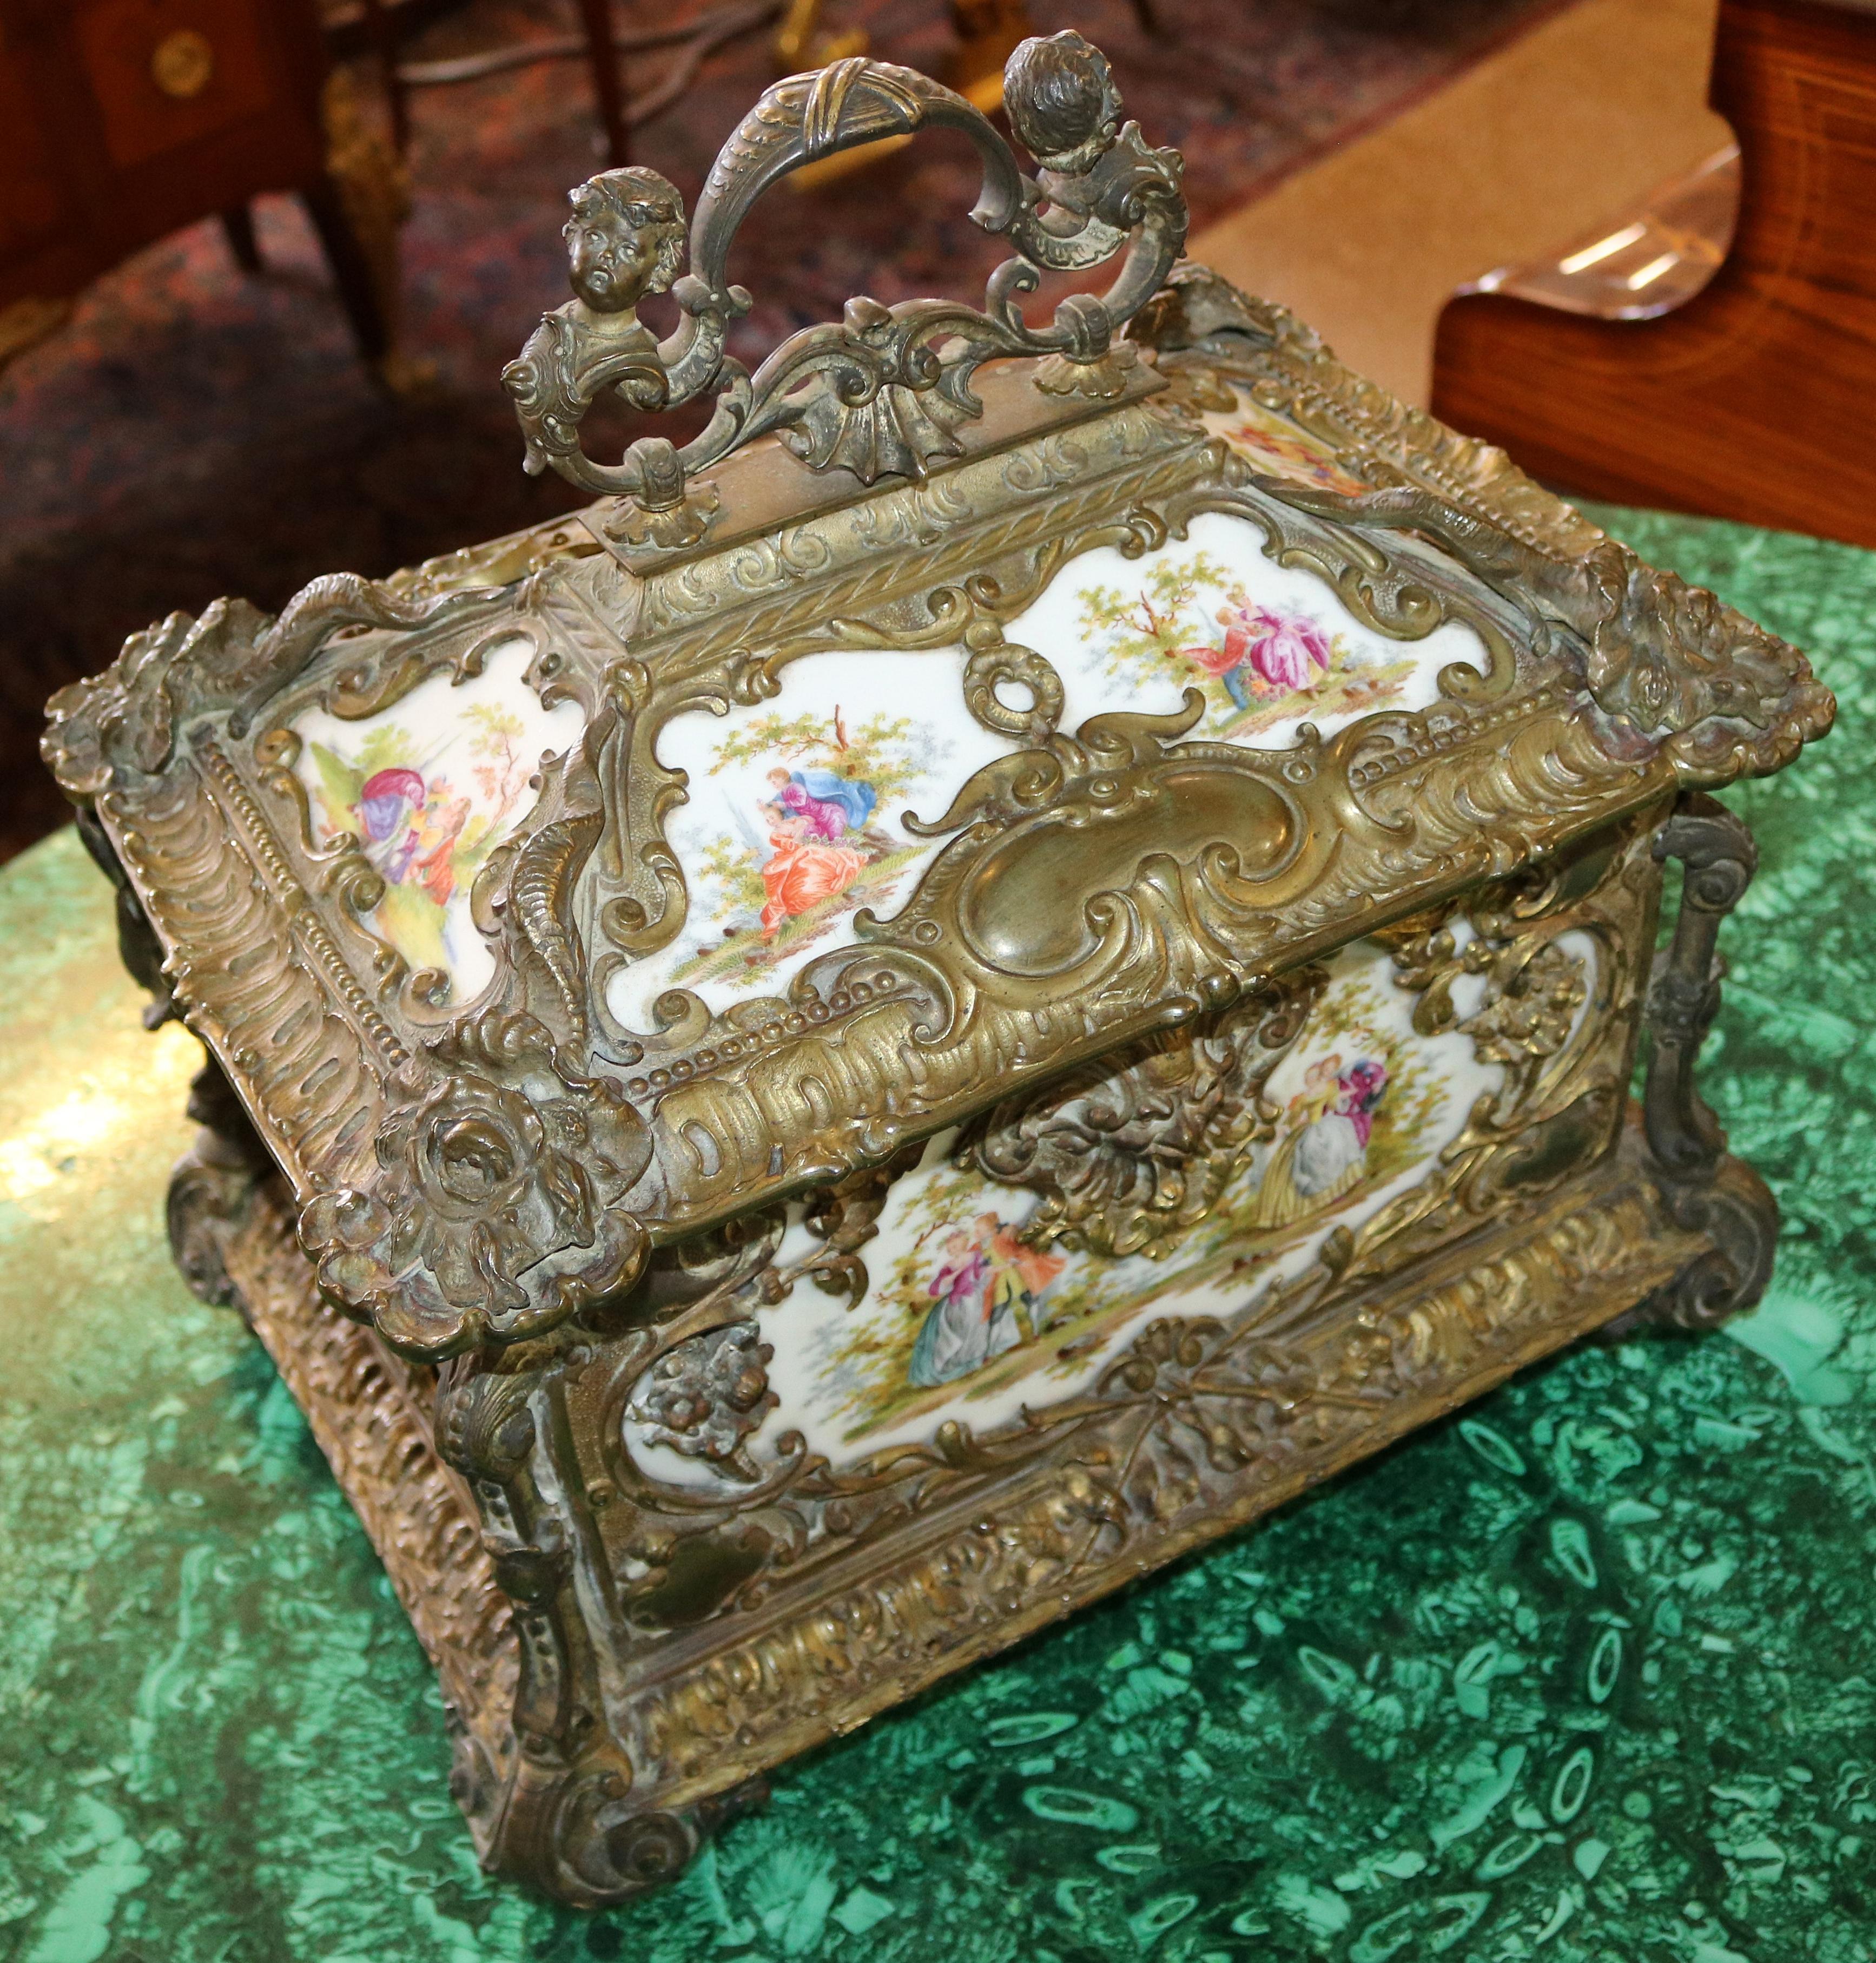 Outstanding Large 19th Century Bronze & Porcelain Jewelry Casket Box For Sale 3